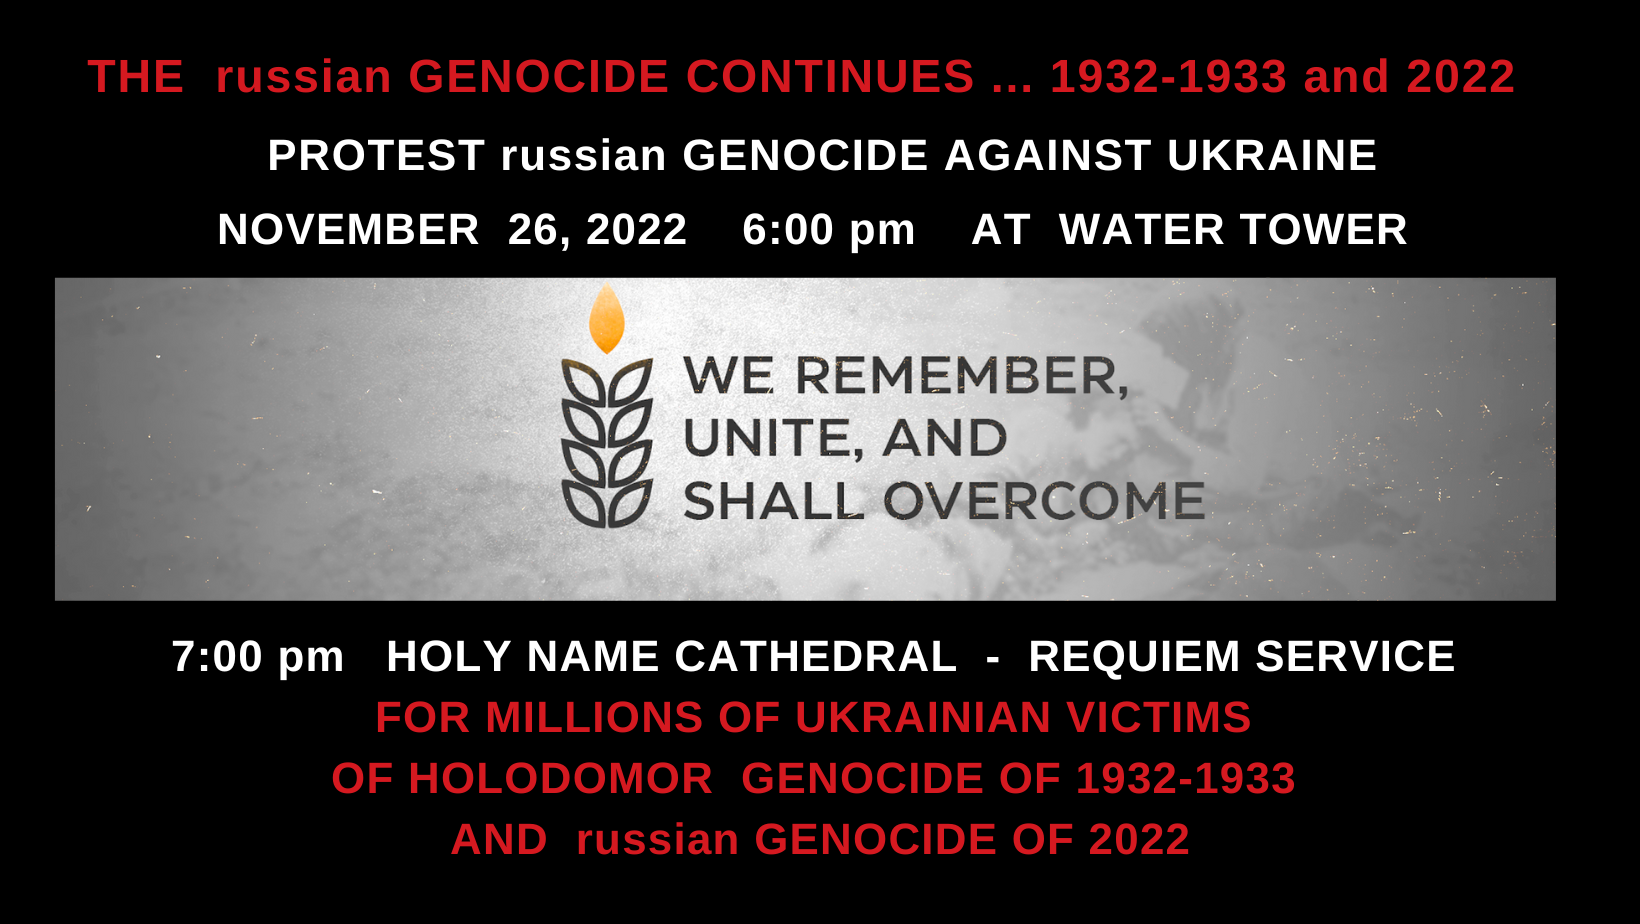 Featured image for “Protest of russian Genocide Against Ukraine 1932-1933 and russian Genocide of 2022”